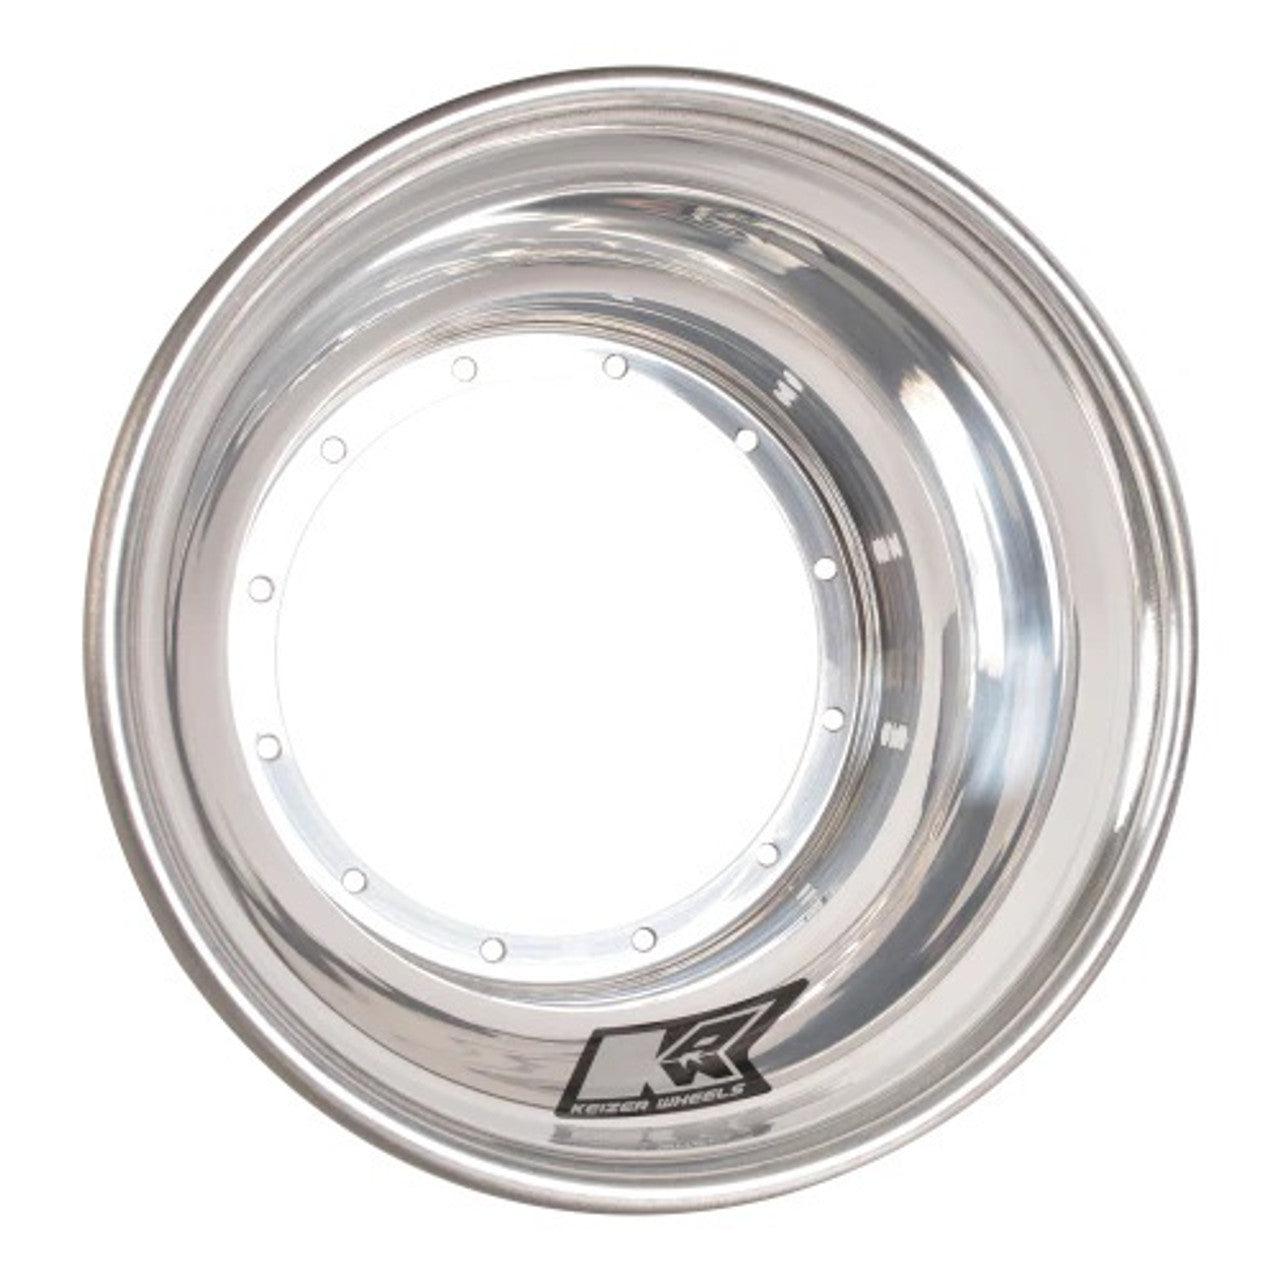 Wheel Half 12-Blt 10in x 6in Polished - Burlile Performance Products